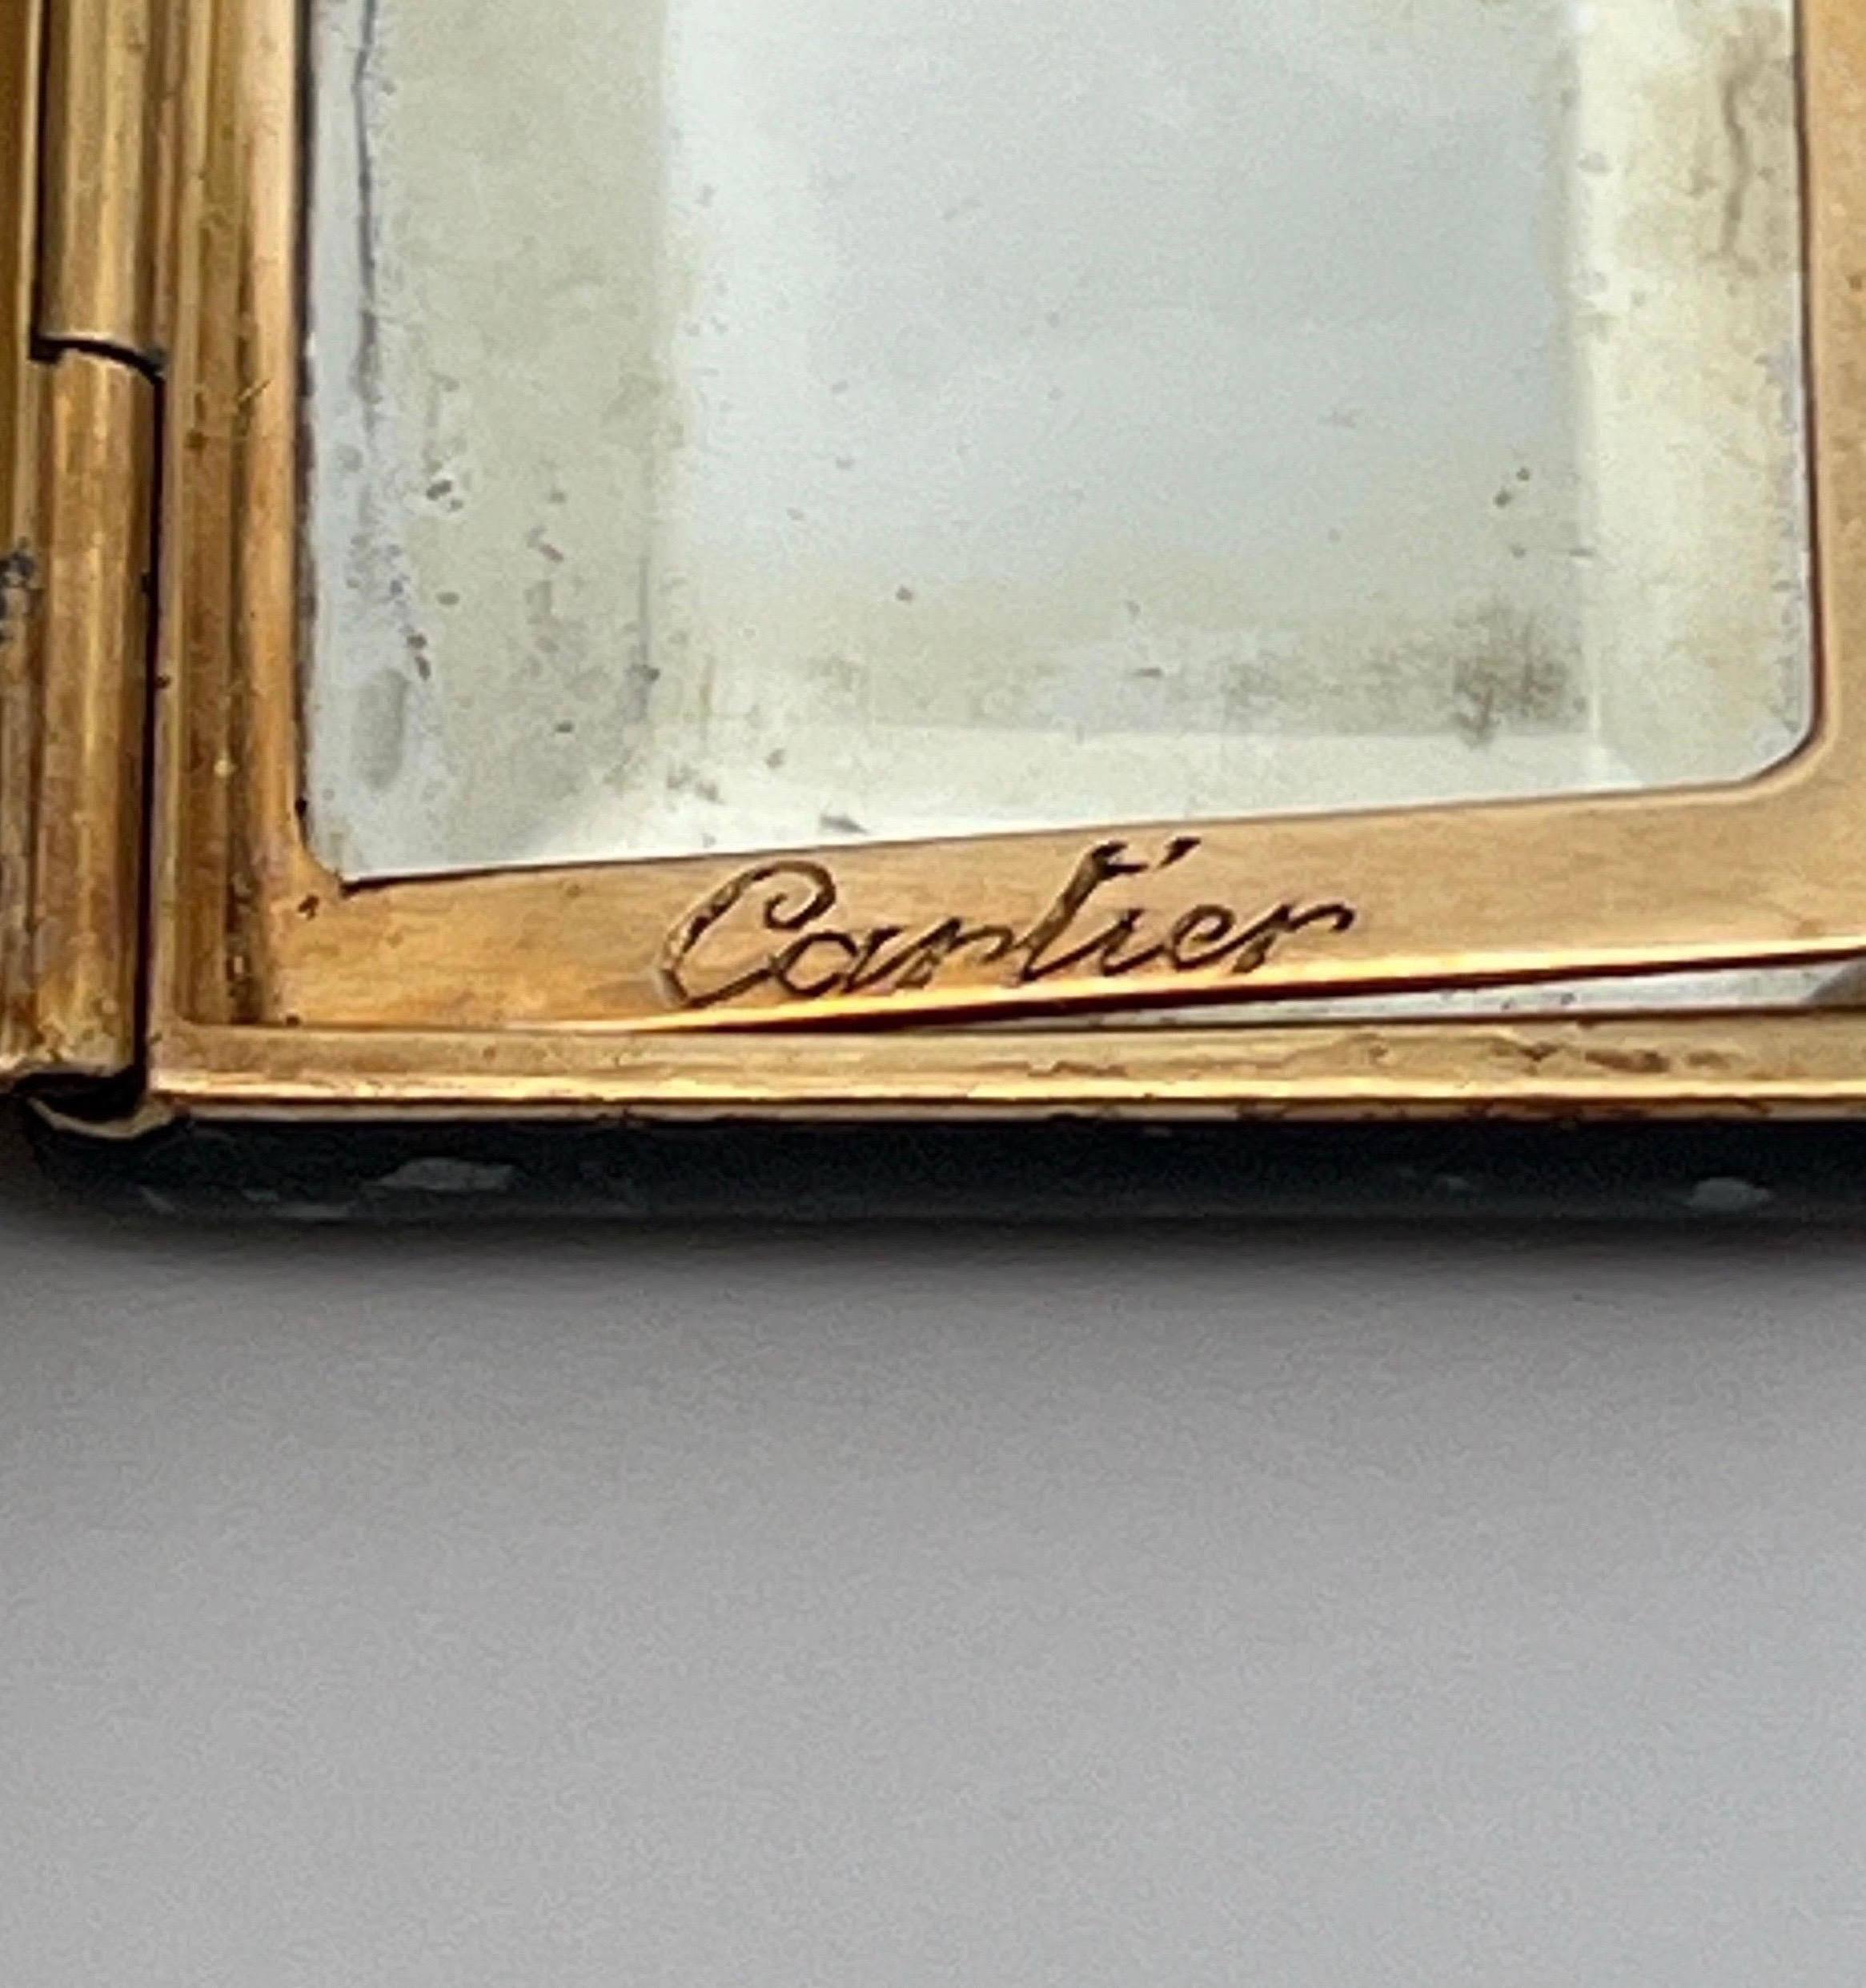 Cartier Art Deco Gold and Enamel Box In Excellent Condition For Sale In New York, NY